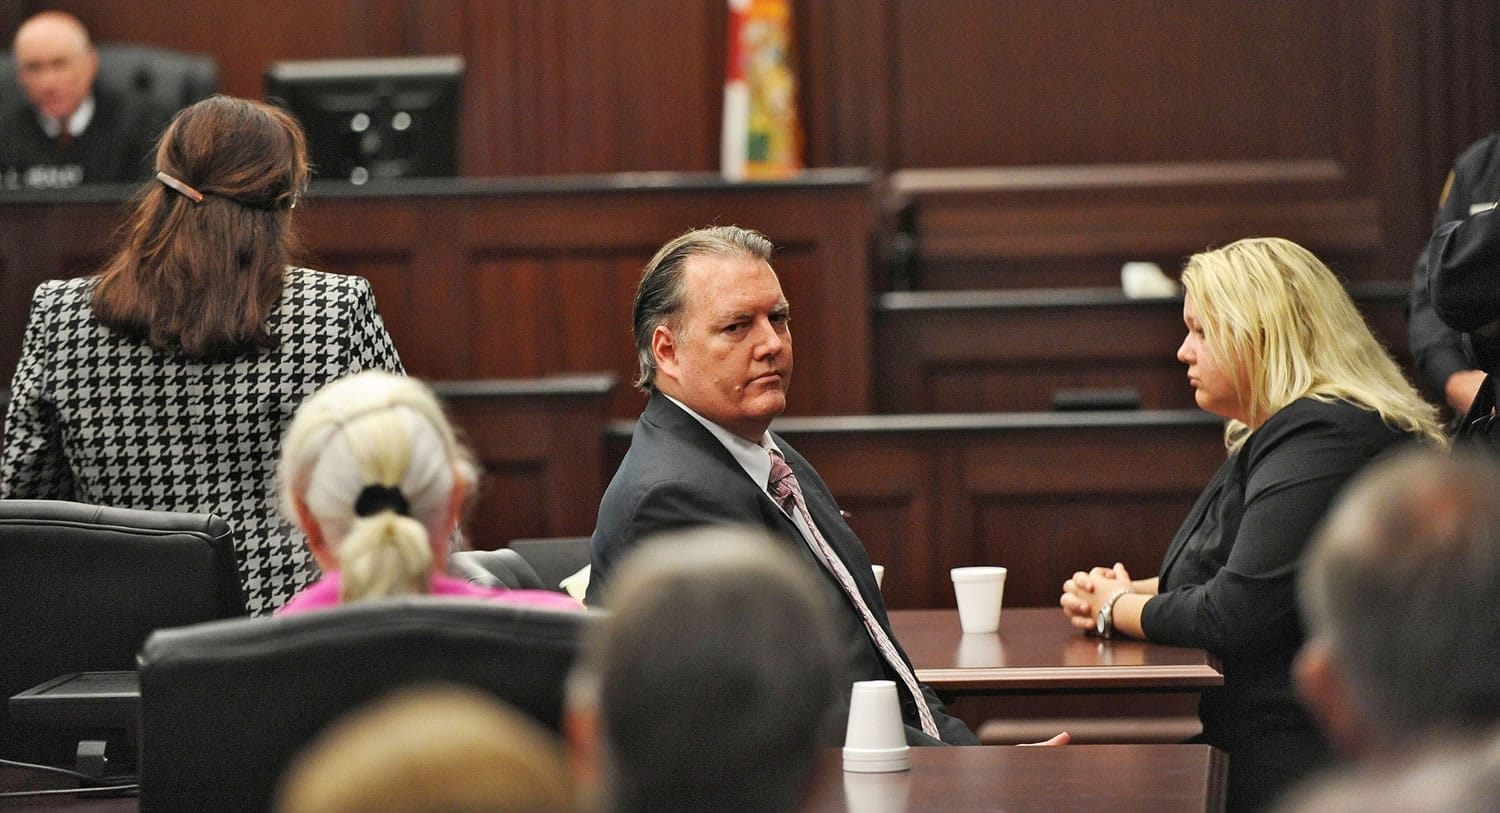 bob mack/Associated Press
Michael Dunn, center, looks back at his parents after the verdict in his retrial Wednesday in Jacksonville, Fla. A jury found Dunn guilty of first-degree murder.